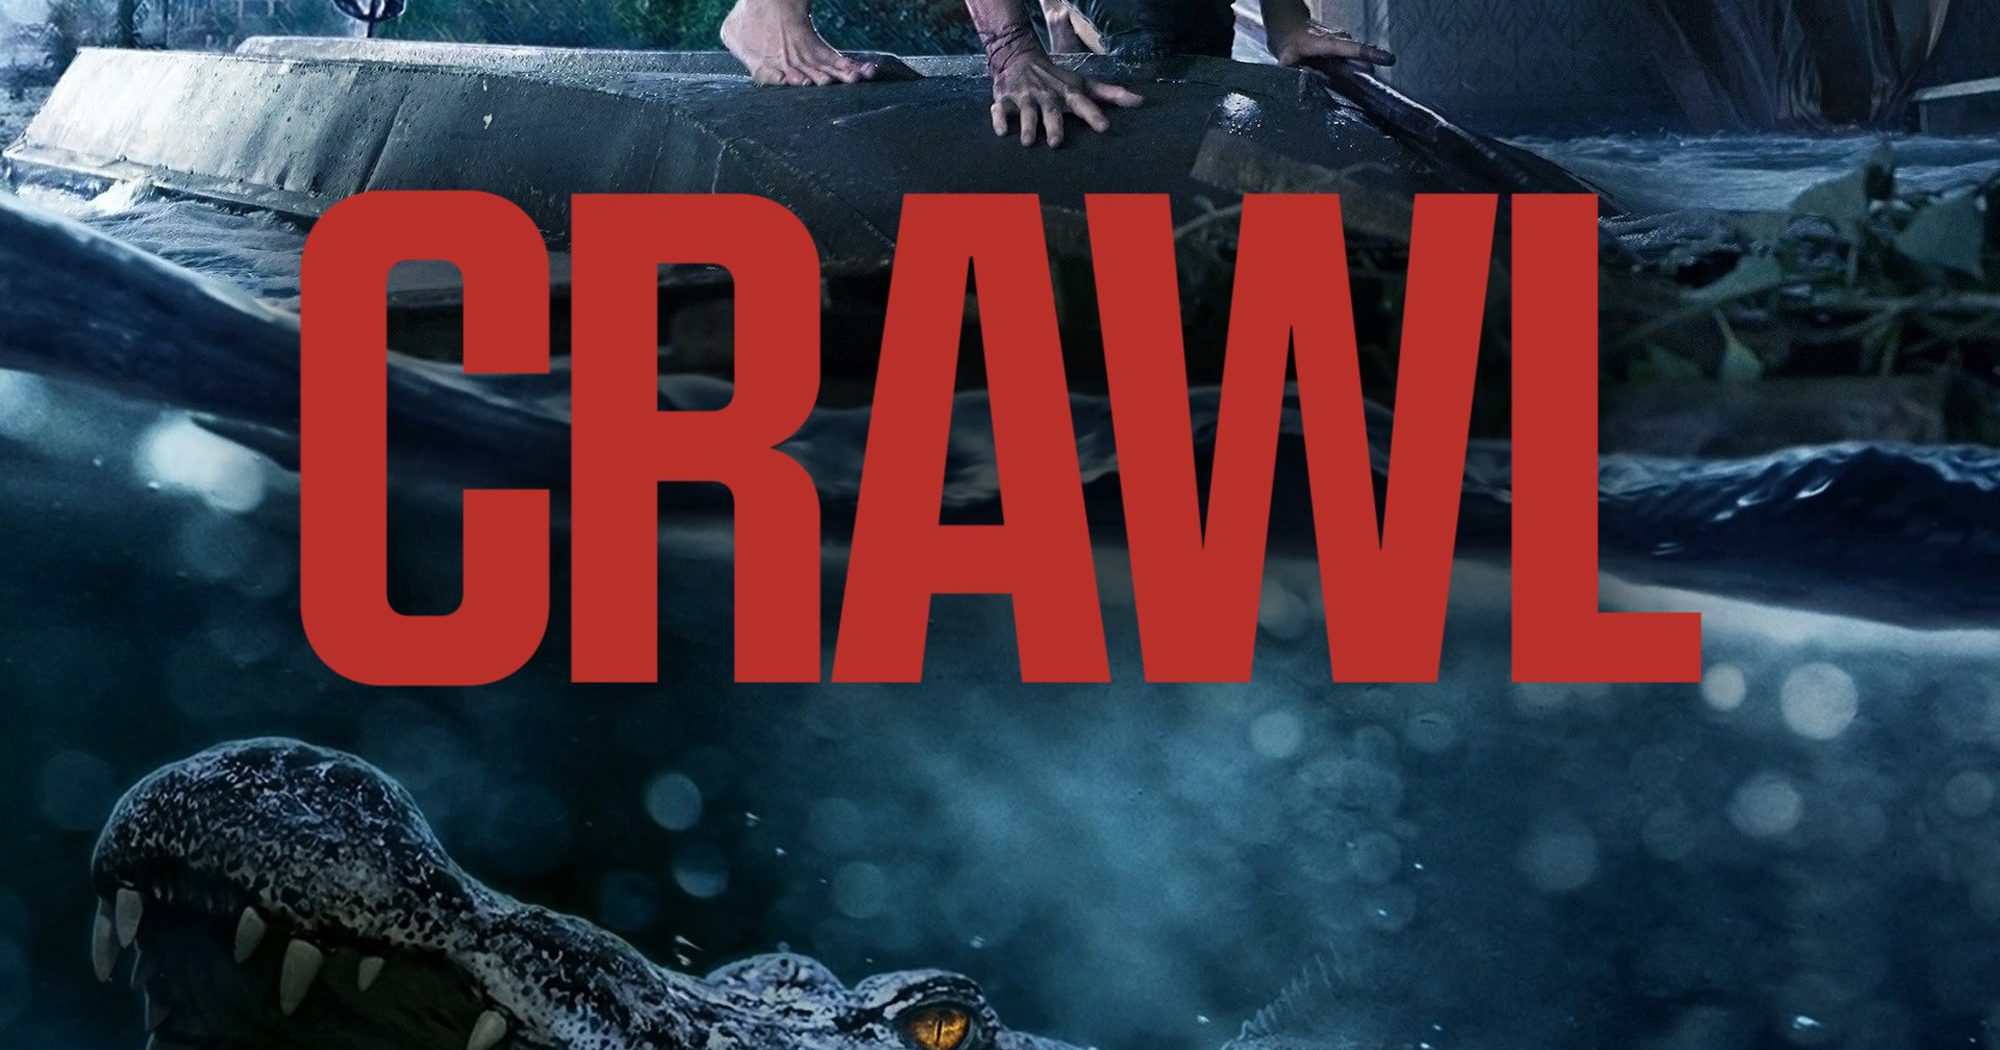 Poster for the movie "Crawl"